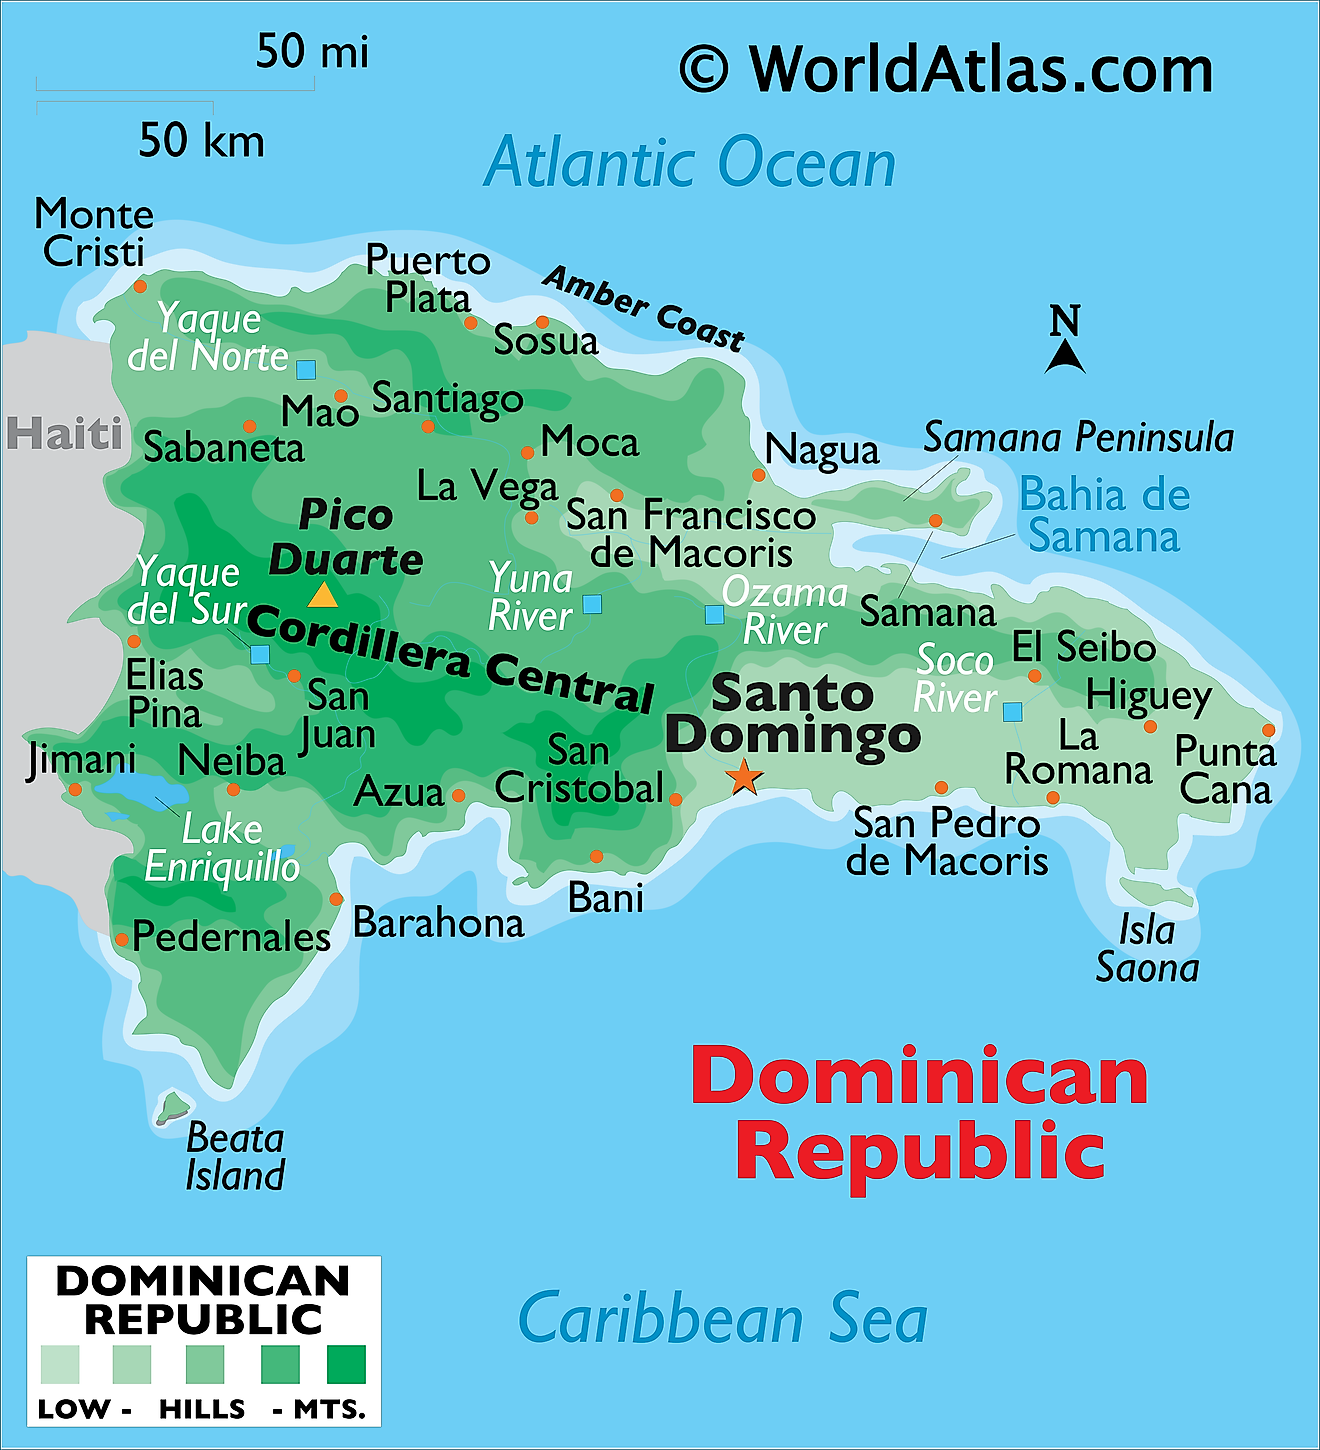 Physical Map of the Dominican Republic showing relief, islands, rivers, mountains, lakes, important cities, and more.